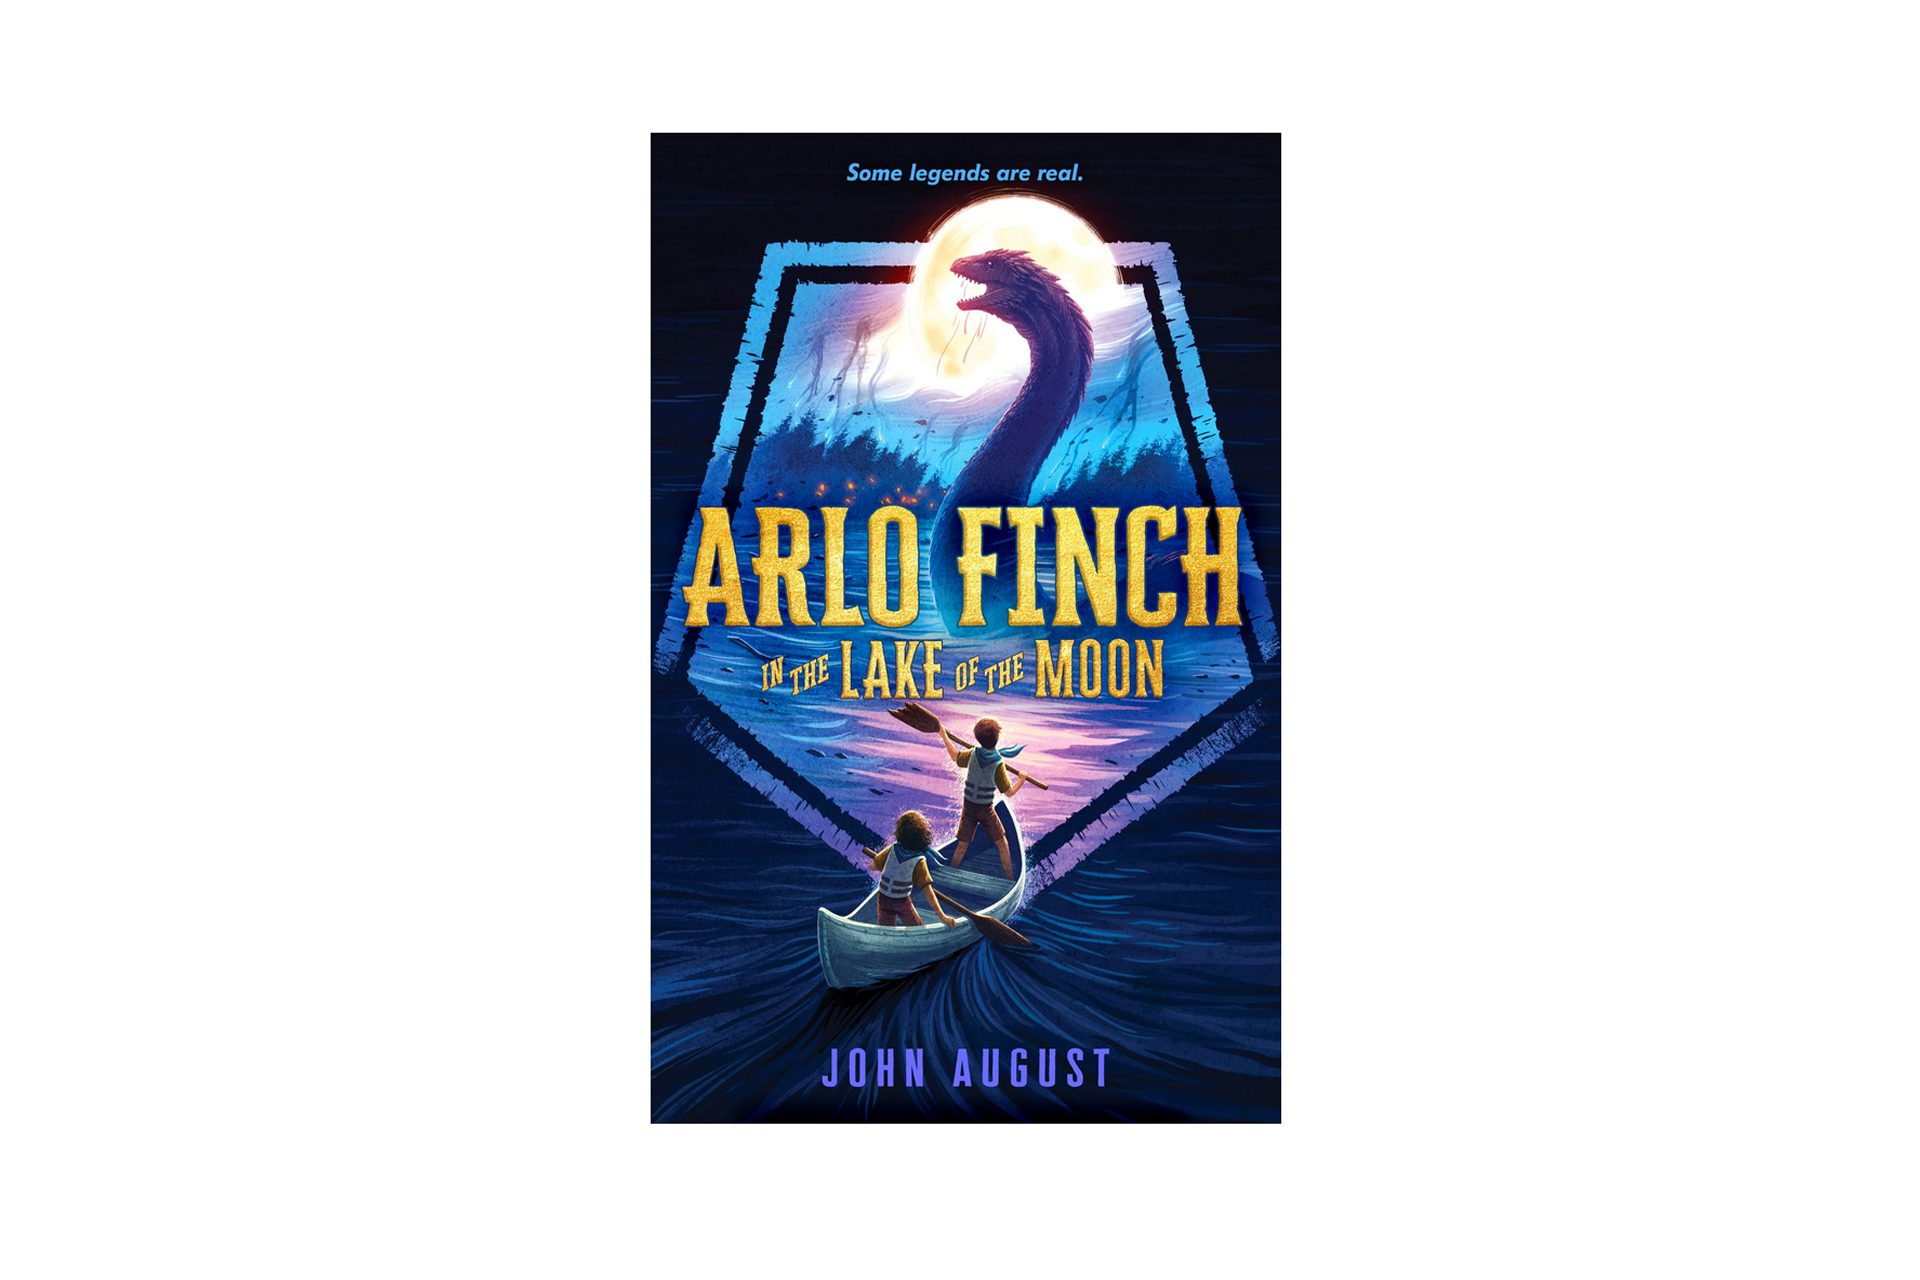 Arlo Finch in the Lake of the Moon Book; Courtesy of Amazon